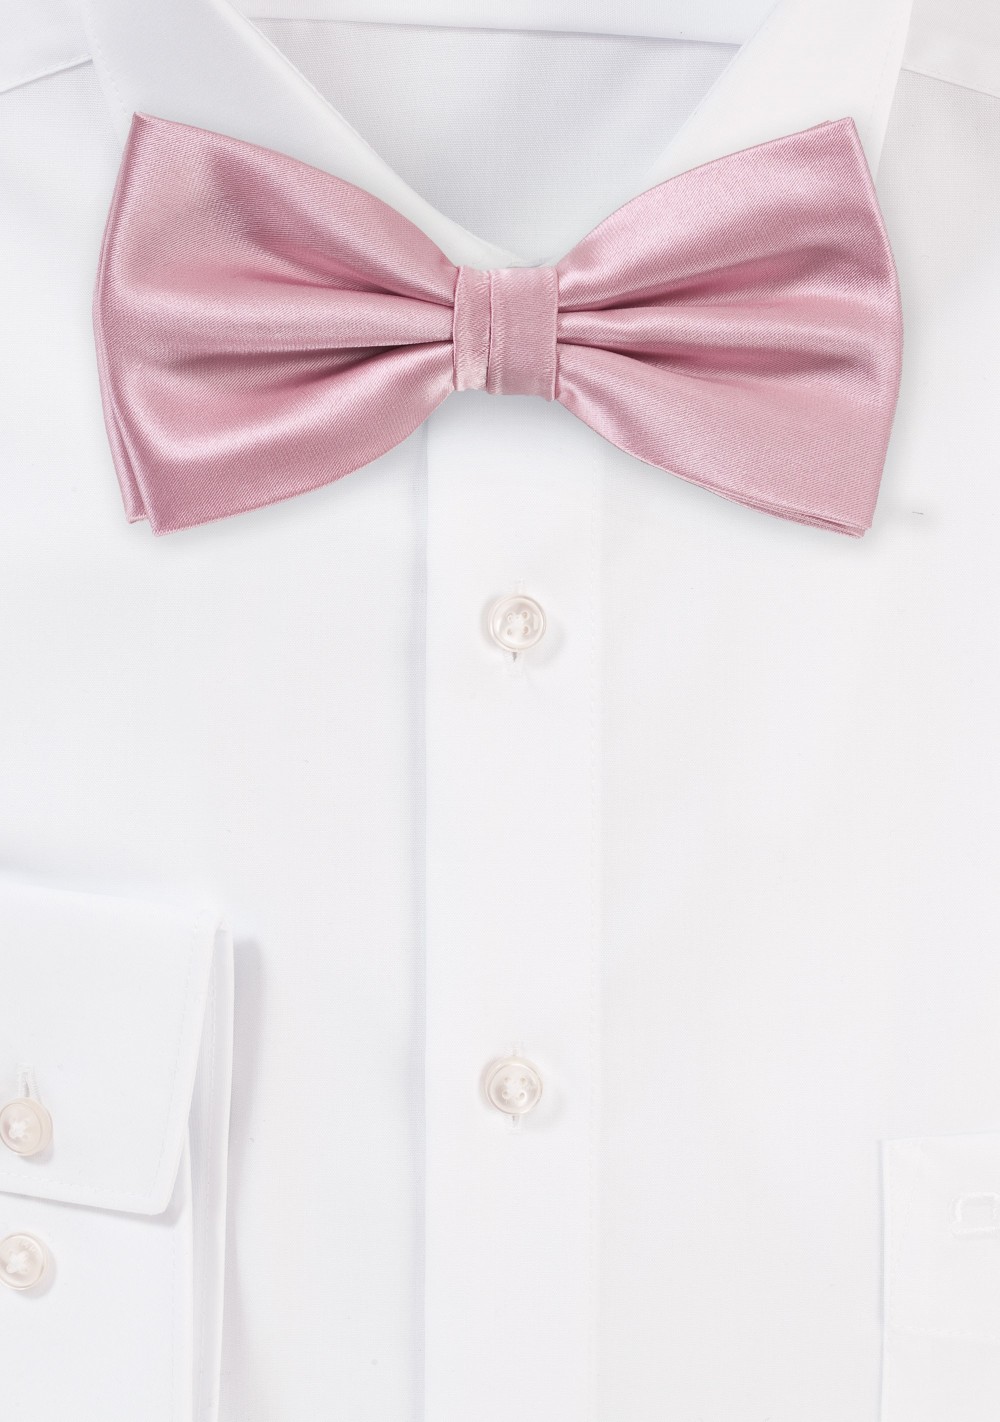 Mens Bow Tie in Dusty Rose